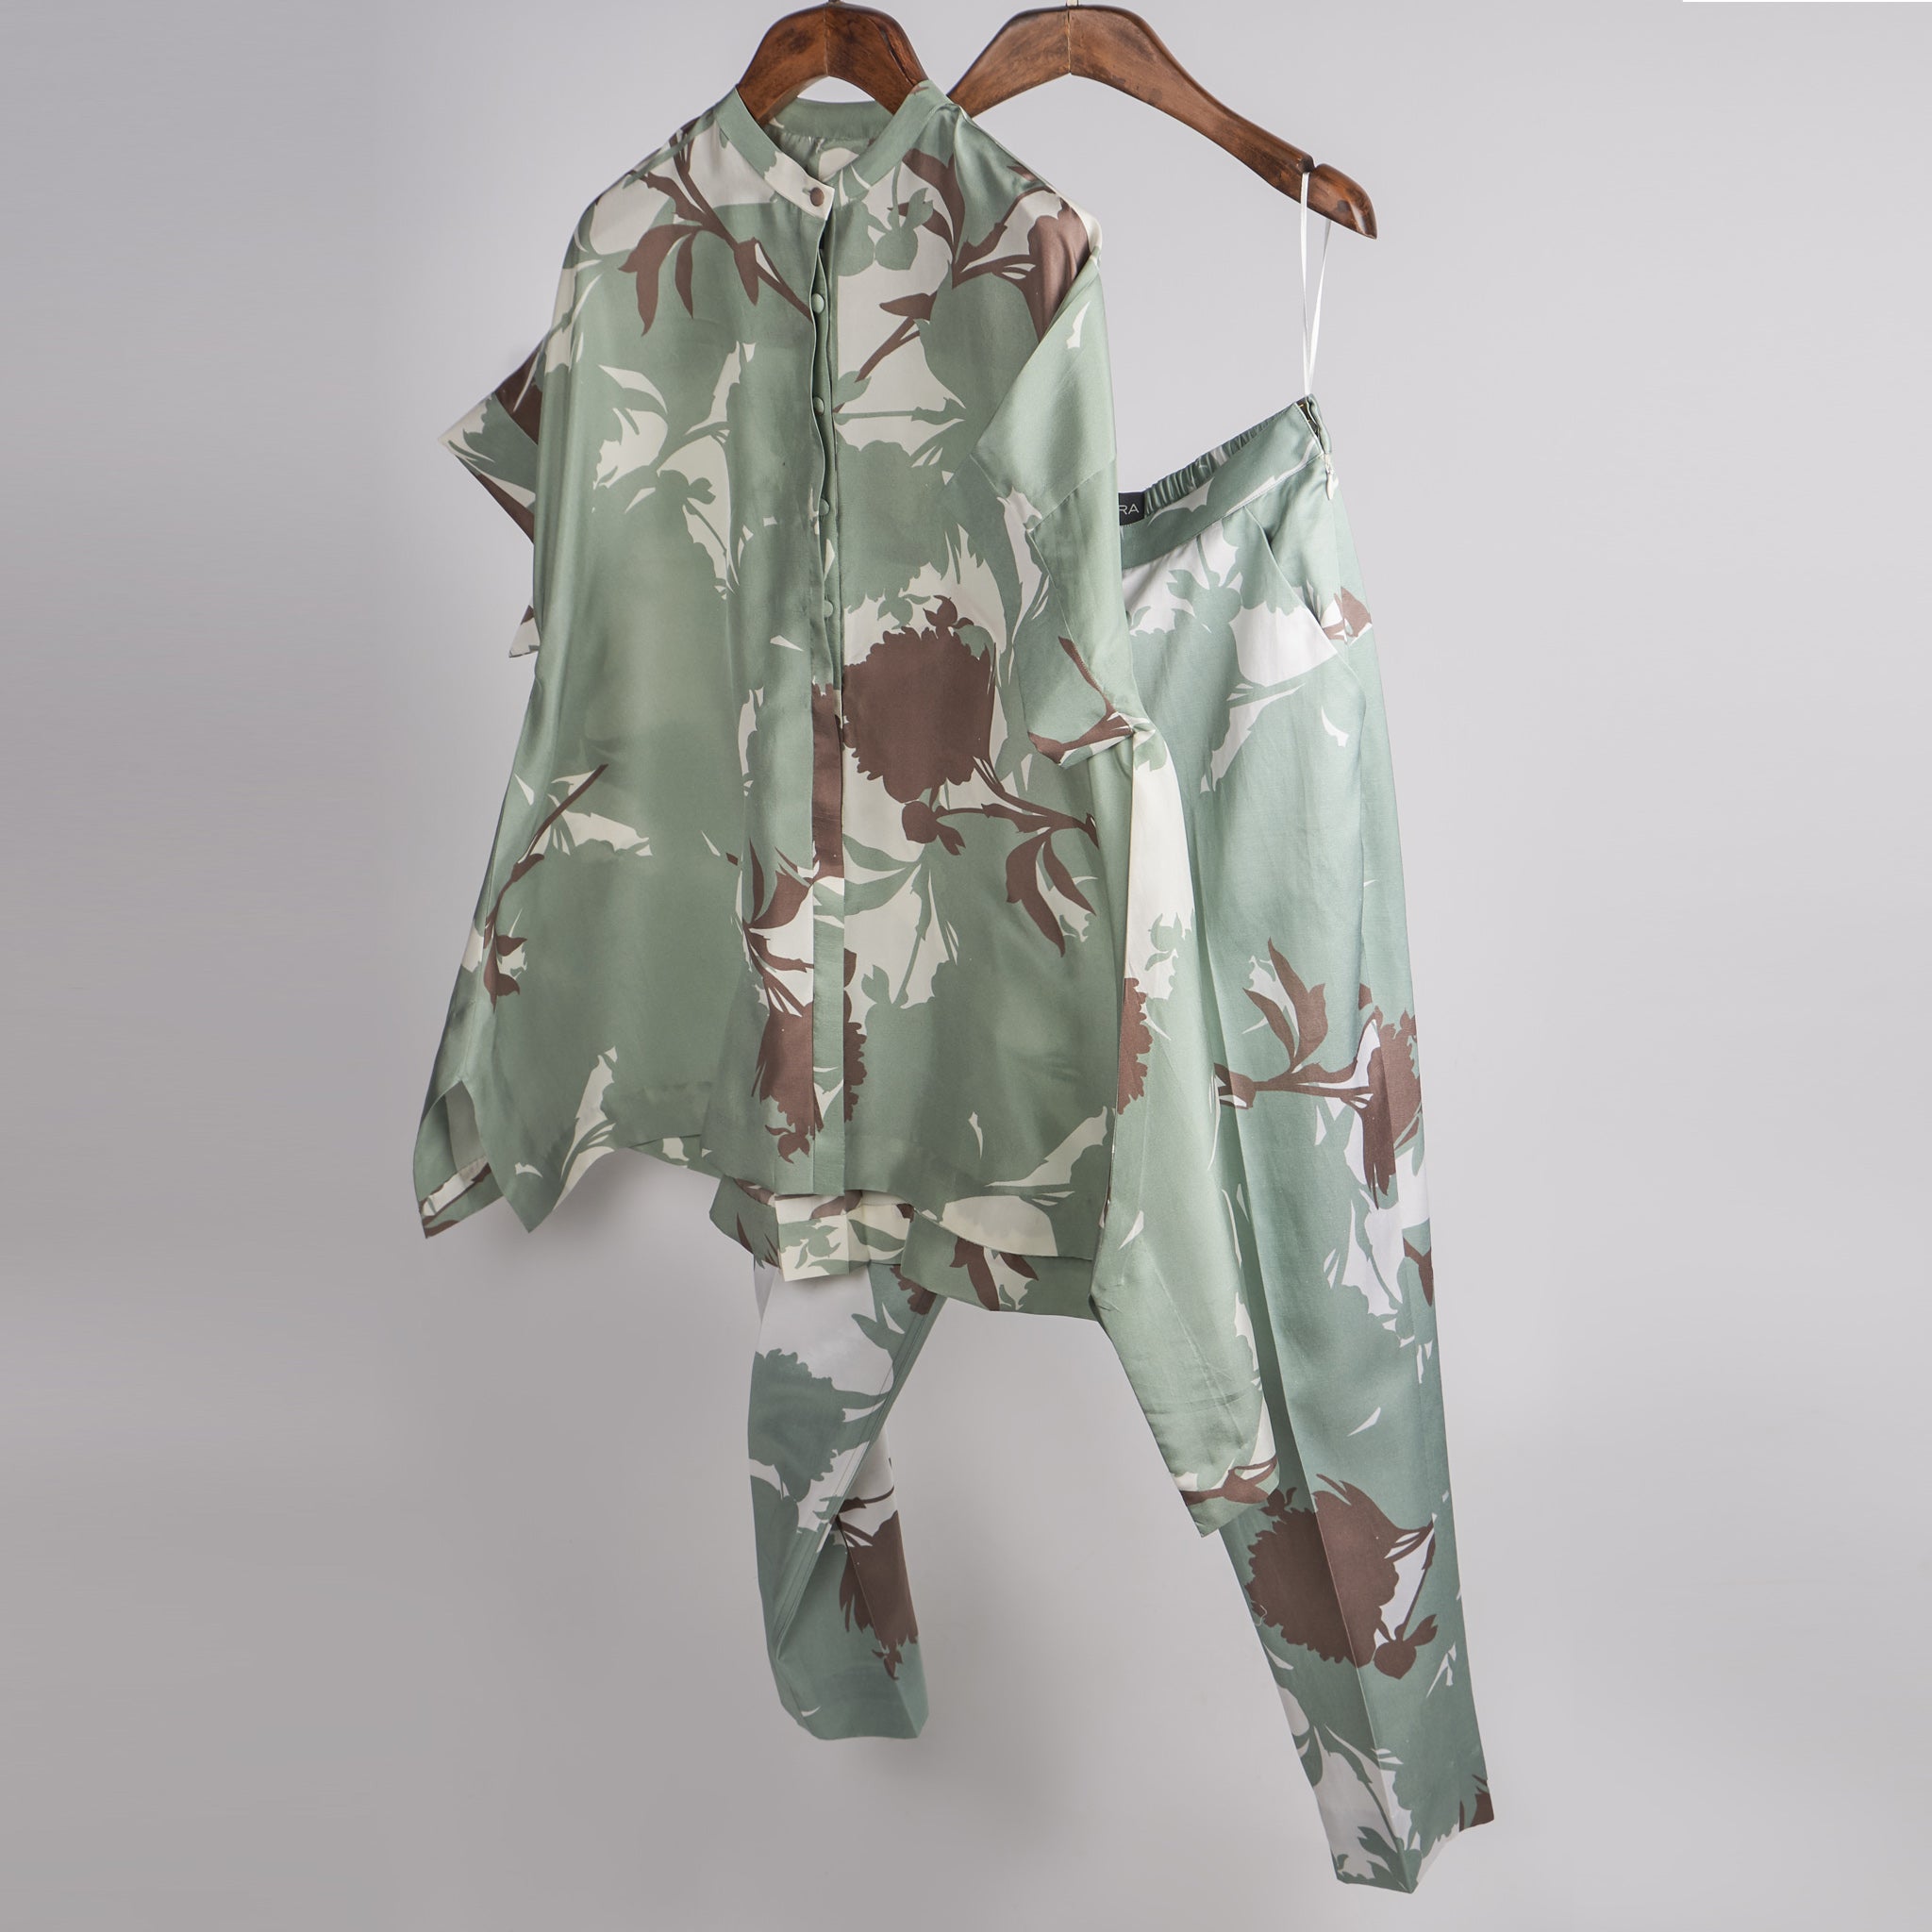 Mint and Beige big floral printed top with printed pants Coordinated set